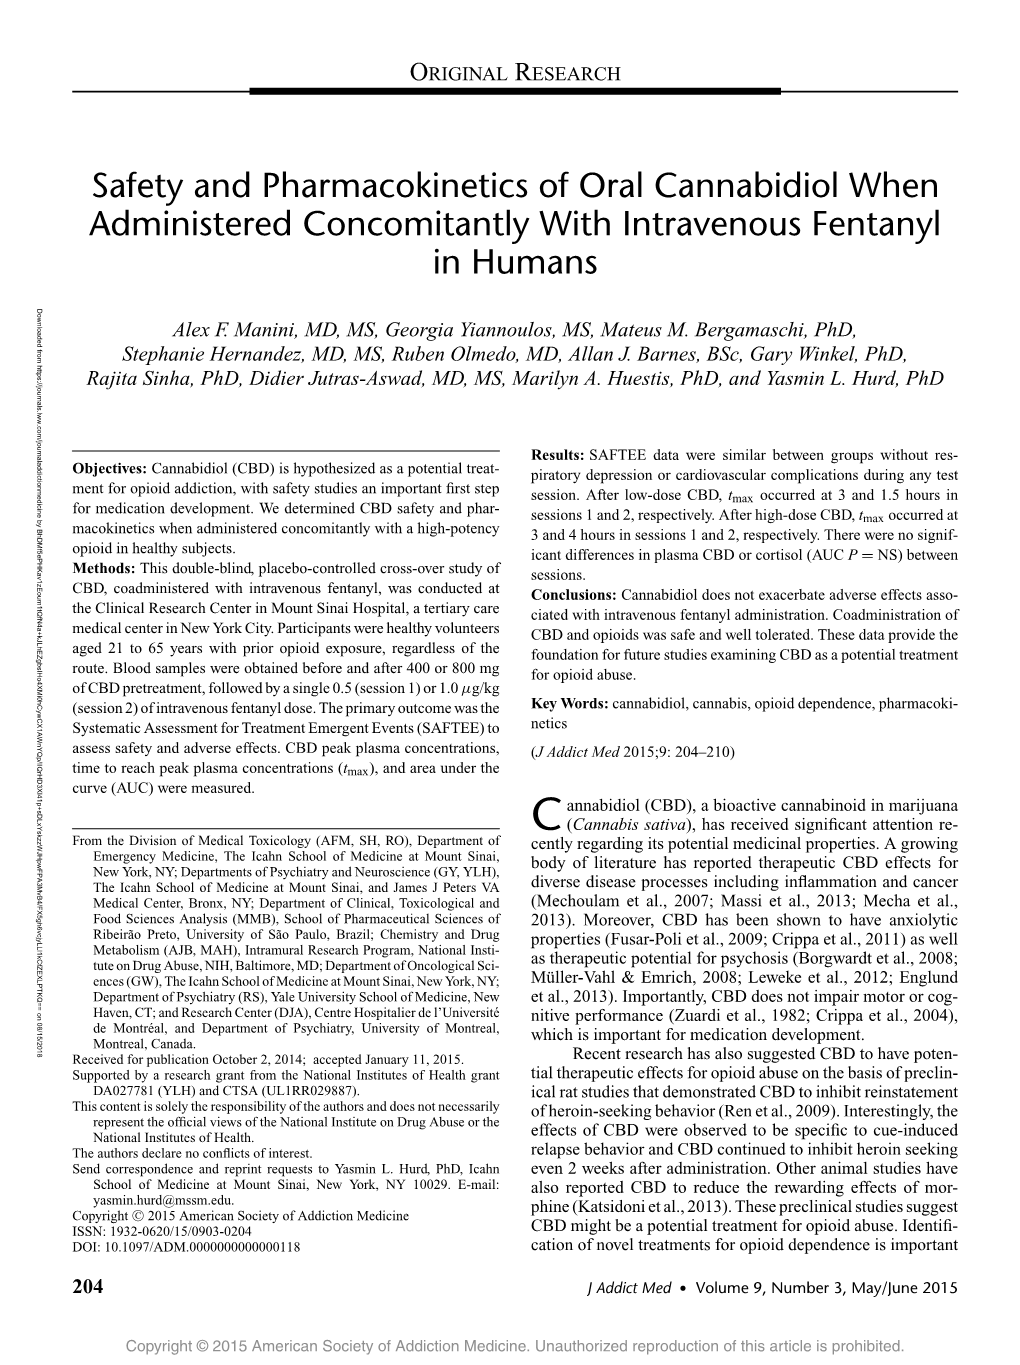 Safety and Pharmacokinetics of Oral Cannabidiol When Administered Concomitantly with Intravenous Fentanyl Rajita Sinha, Phd, Didier Jutras-Aswad, MD, MS, Marilyn A